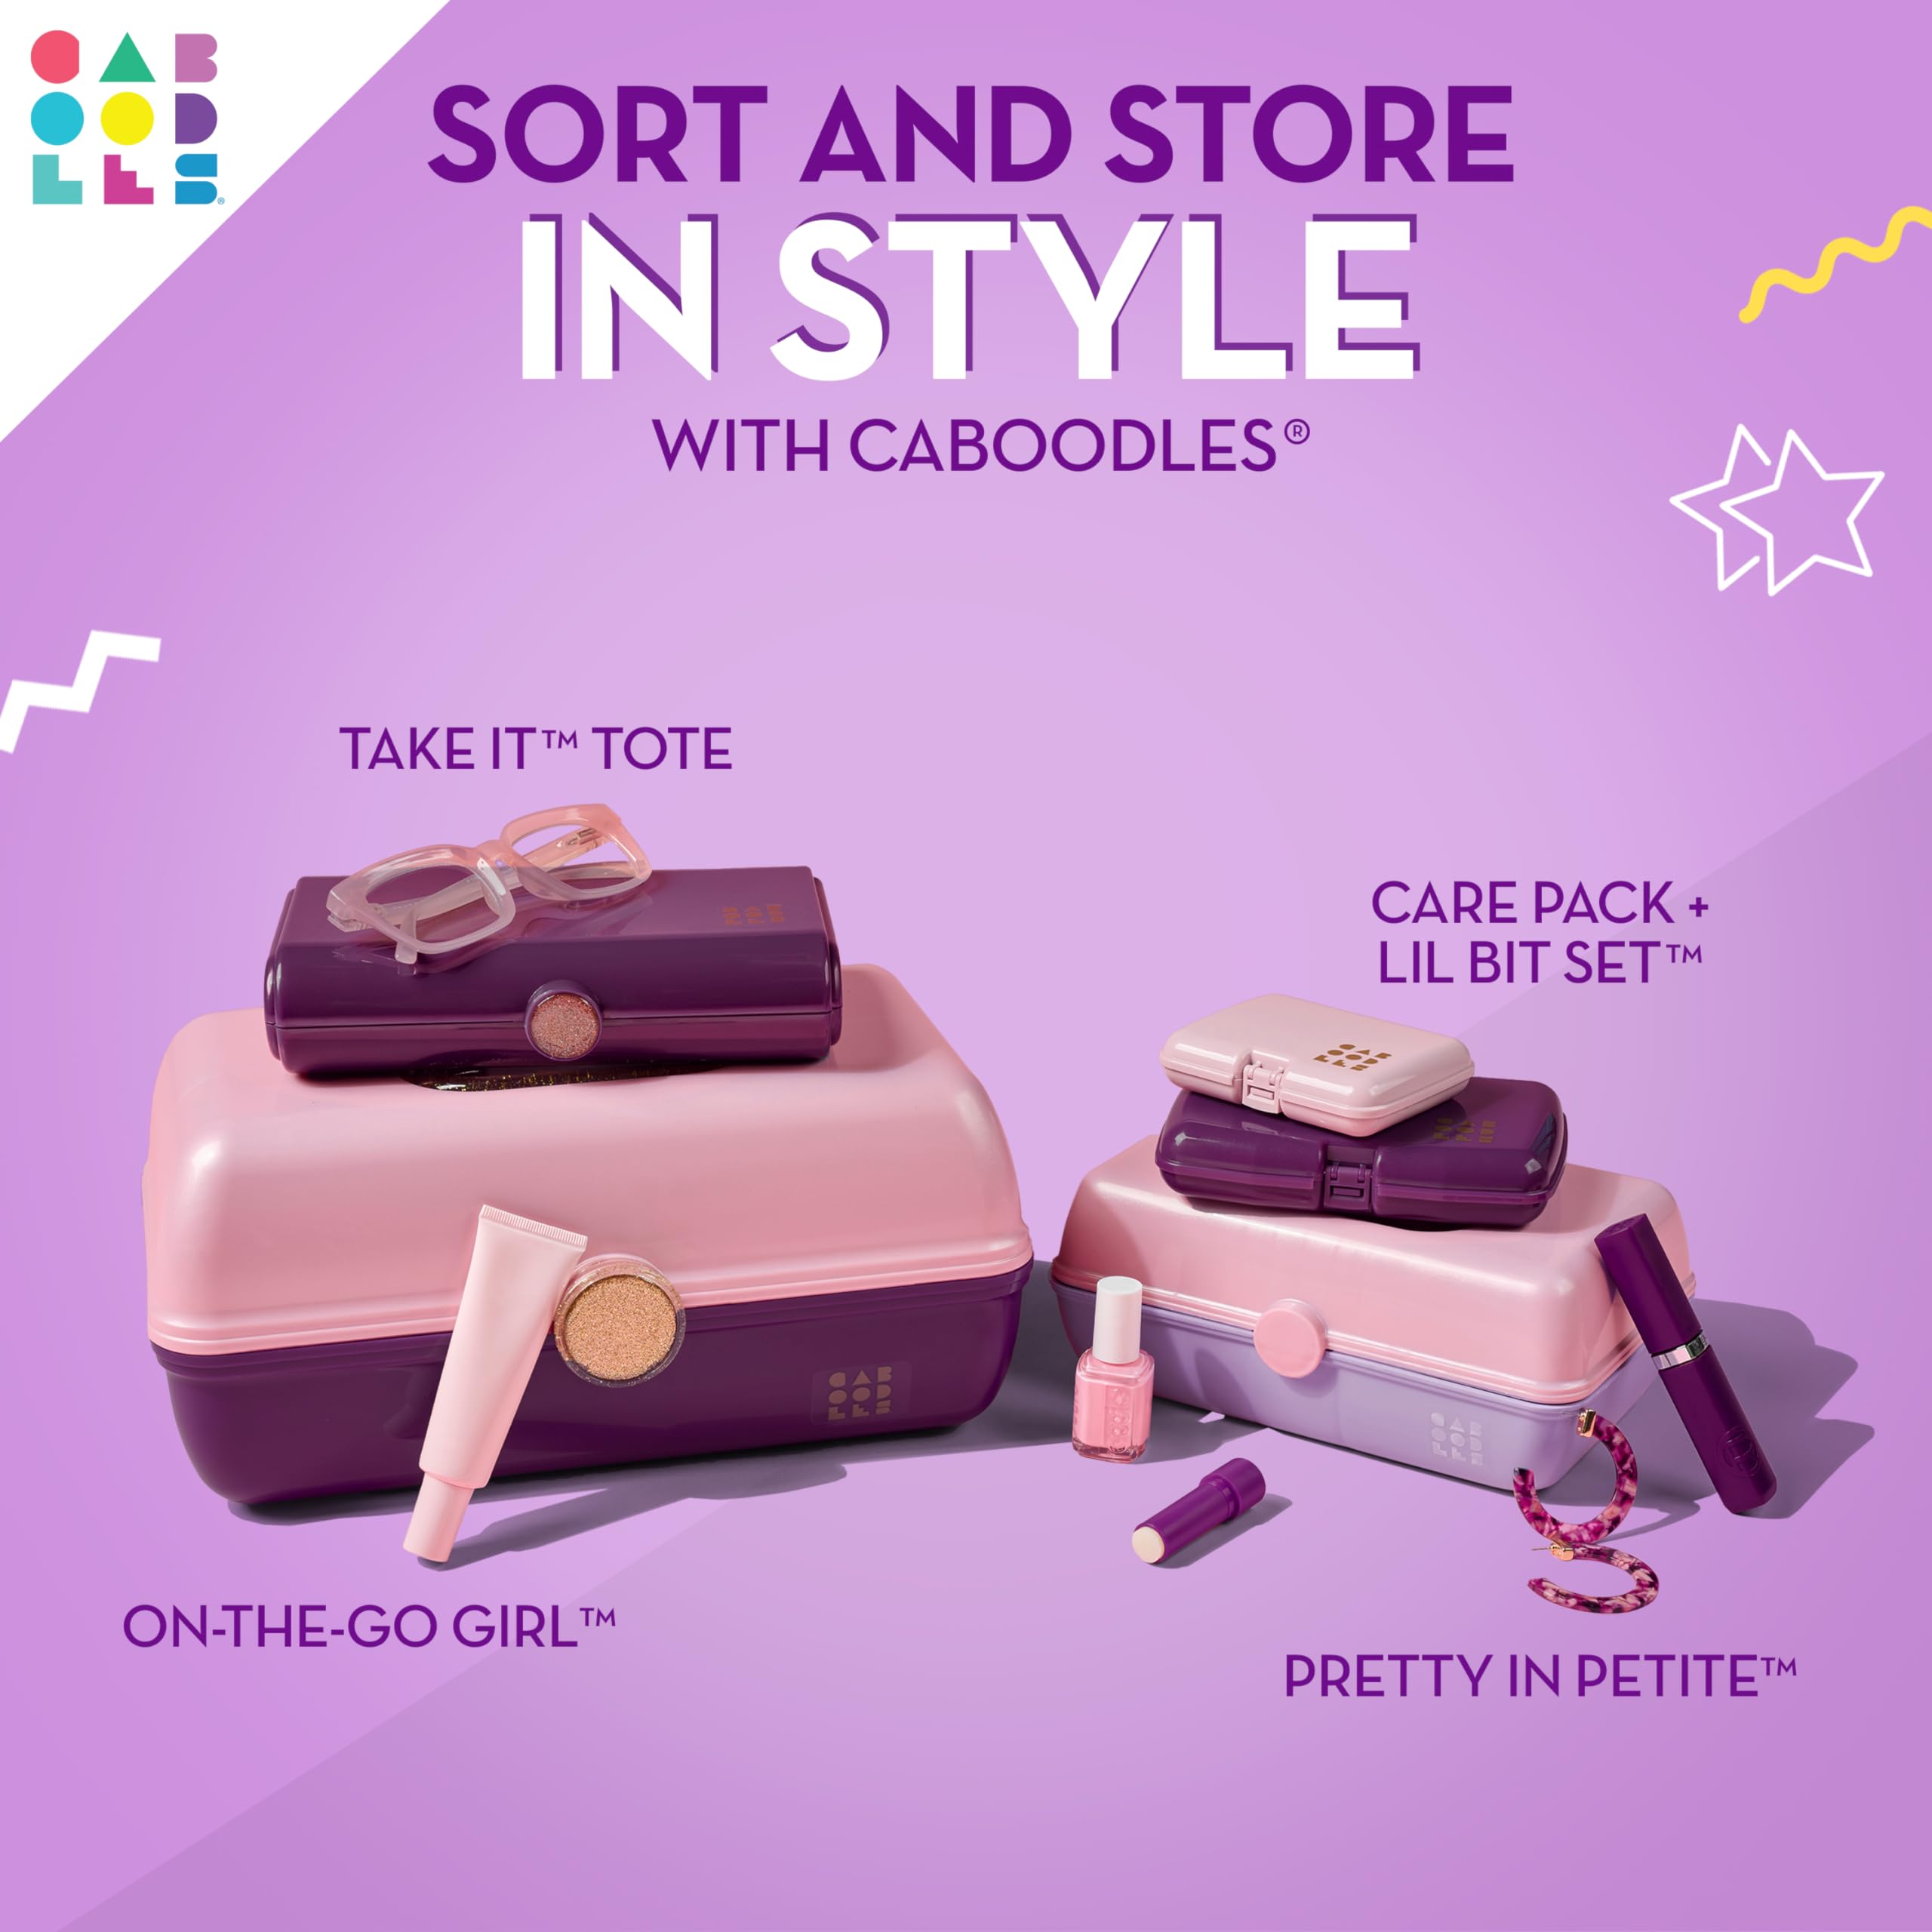 Caboodles Pretty in Petite Makeup Box, Two-Tone Purple Sparkle on Pink Sparkle, Hard Plastic Organizer Box, 2 Swivel Trays, Fashion Mirror, Secure Latch for Safe Travel